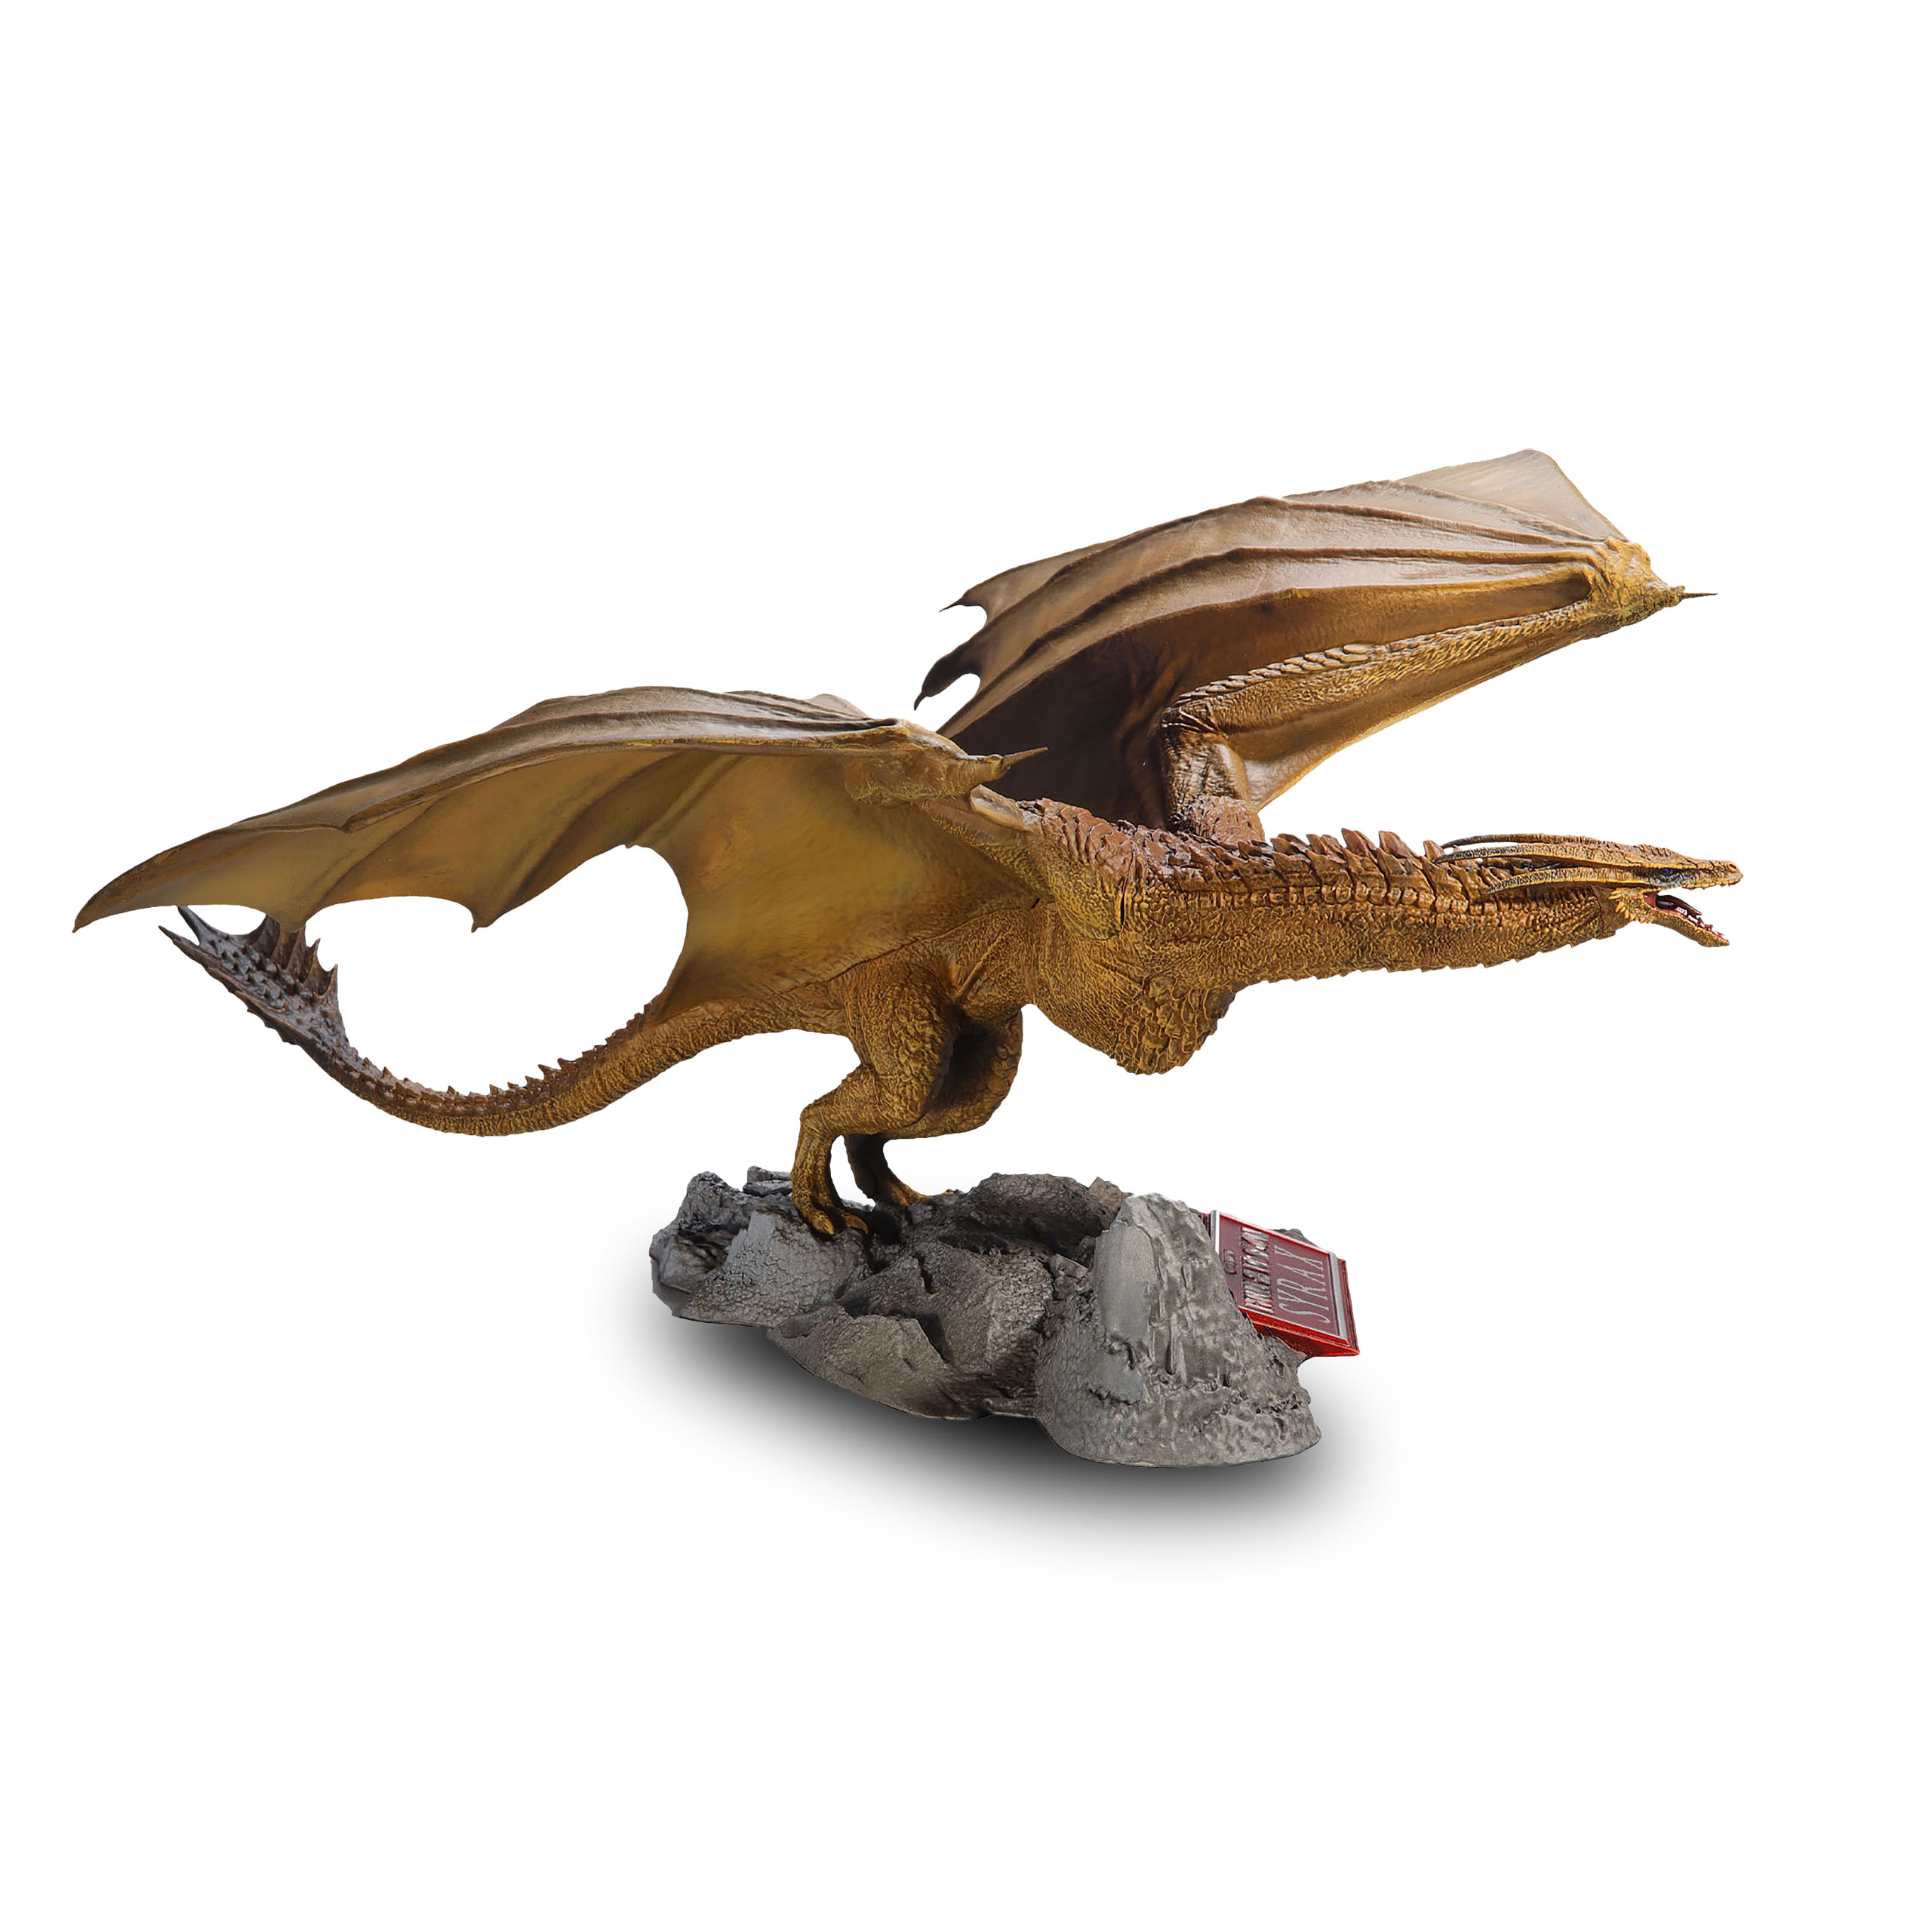 House of the Dragon - Syrax Figur